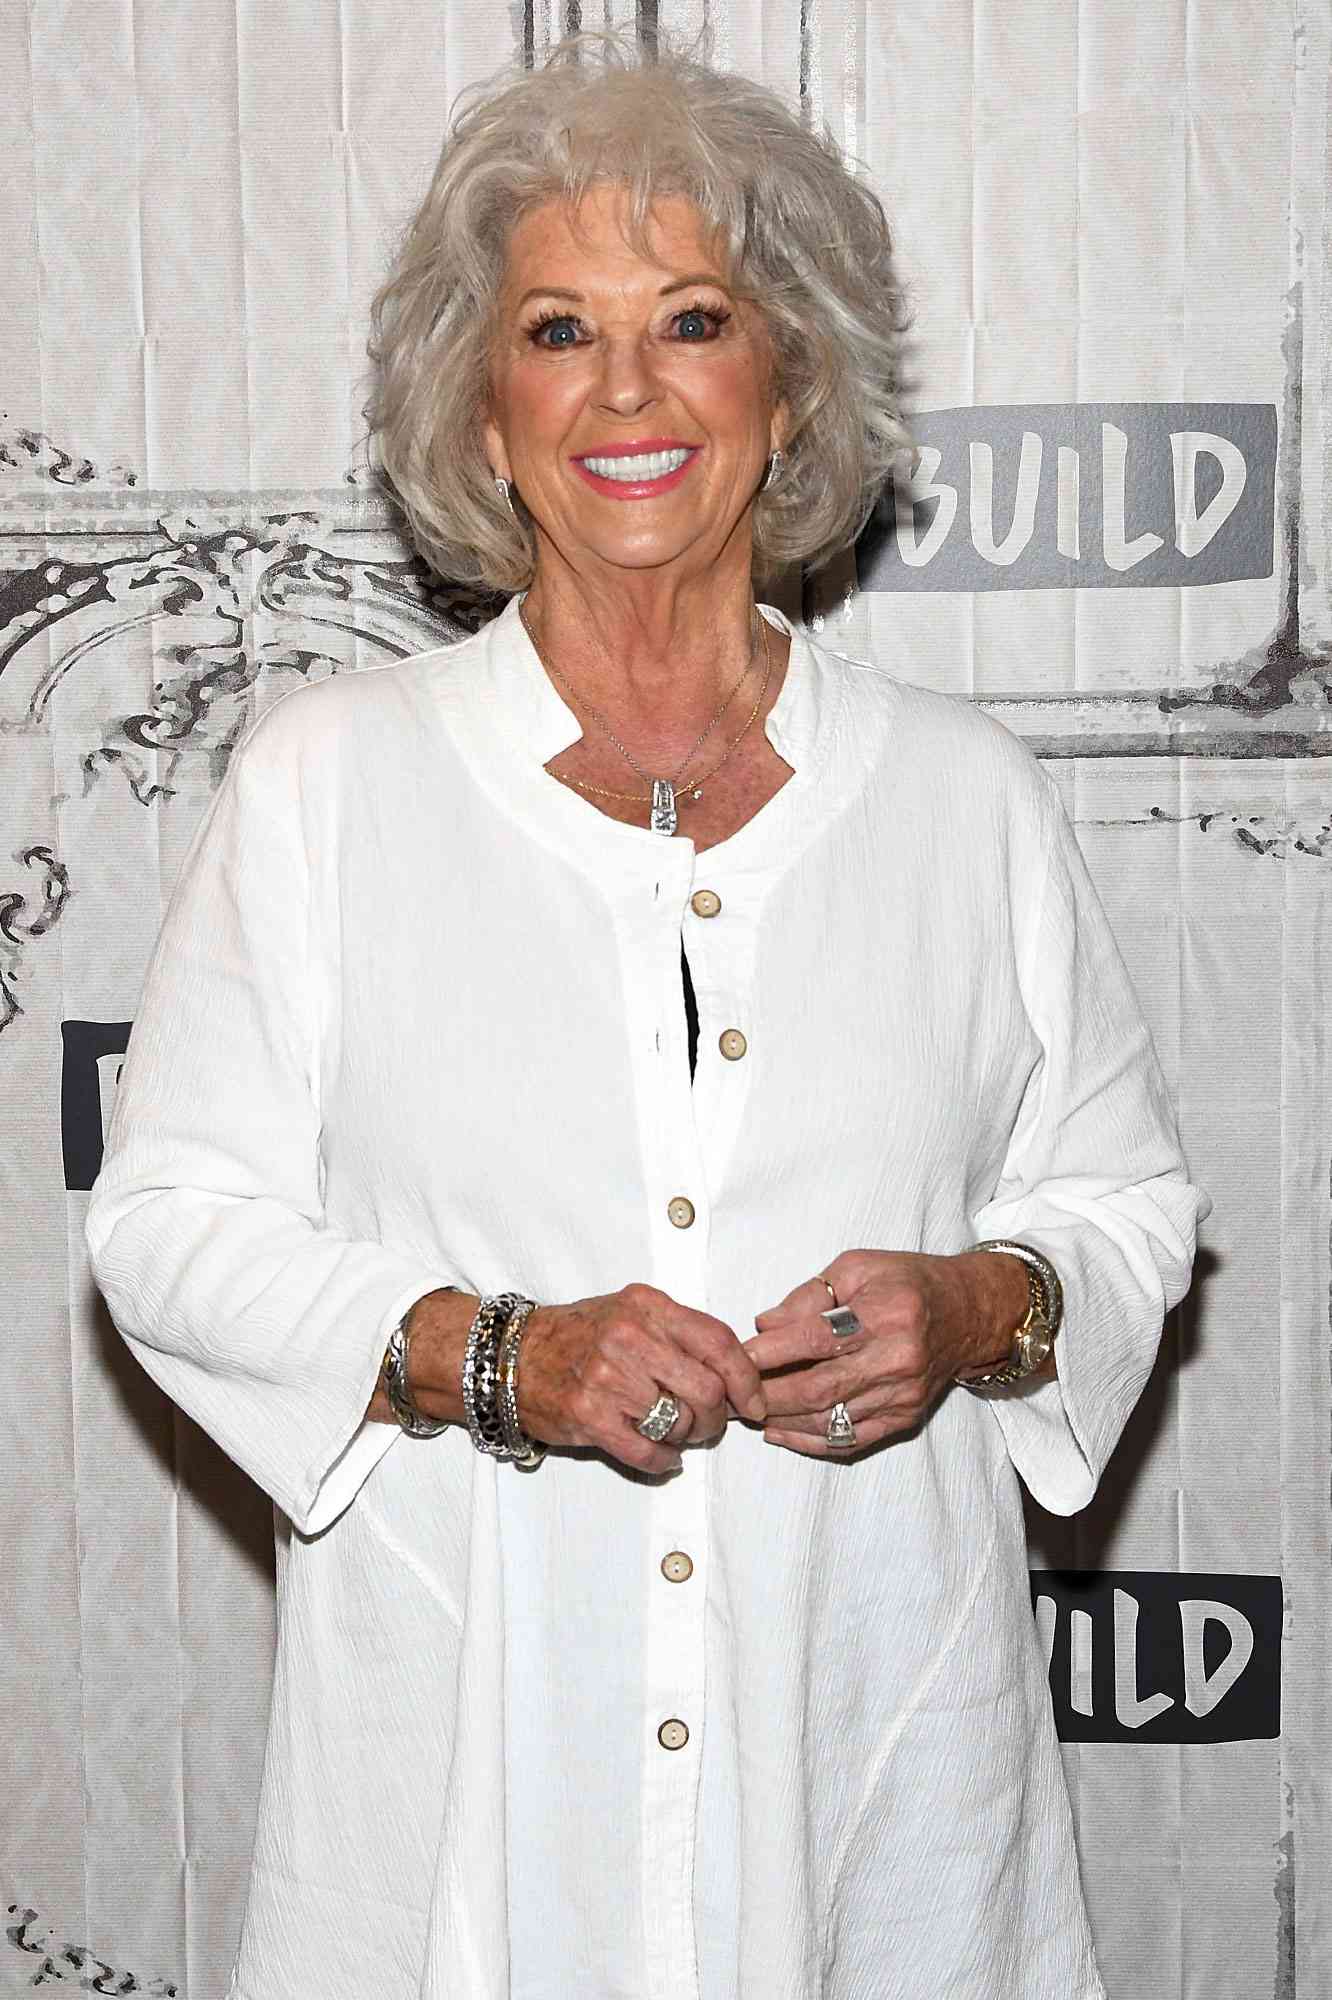 Build Presents Paula Deen Discussing Her New Cookbook "At The Southern Table With Paula Deen"